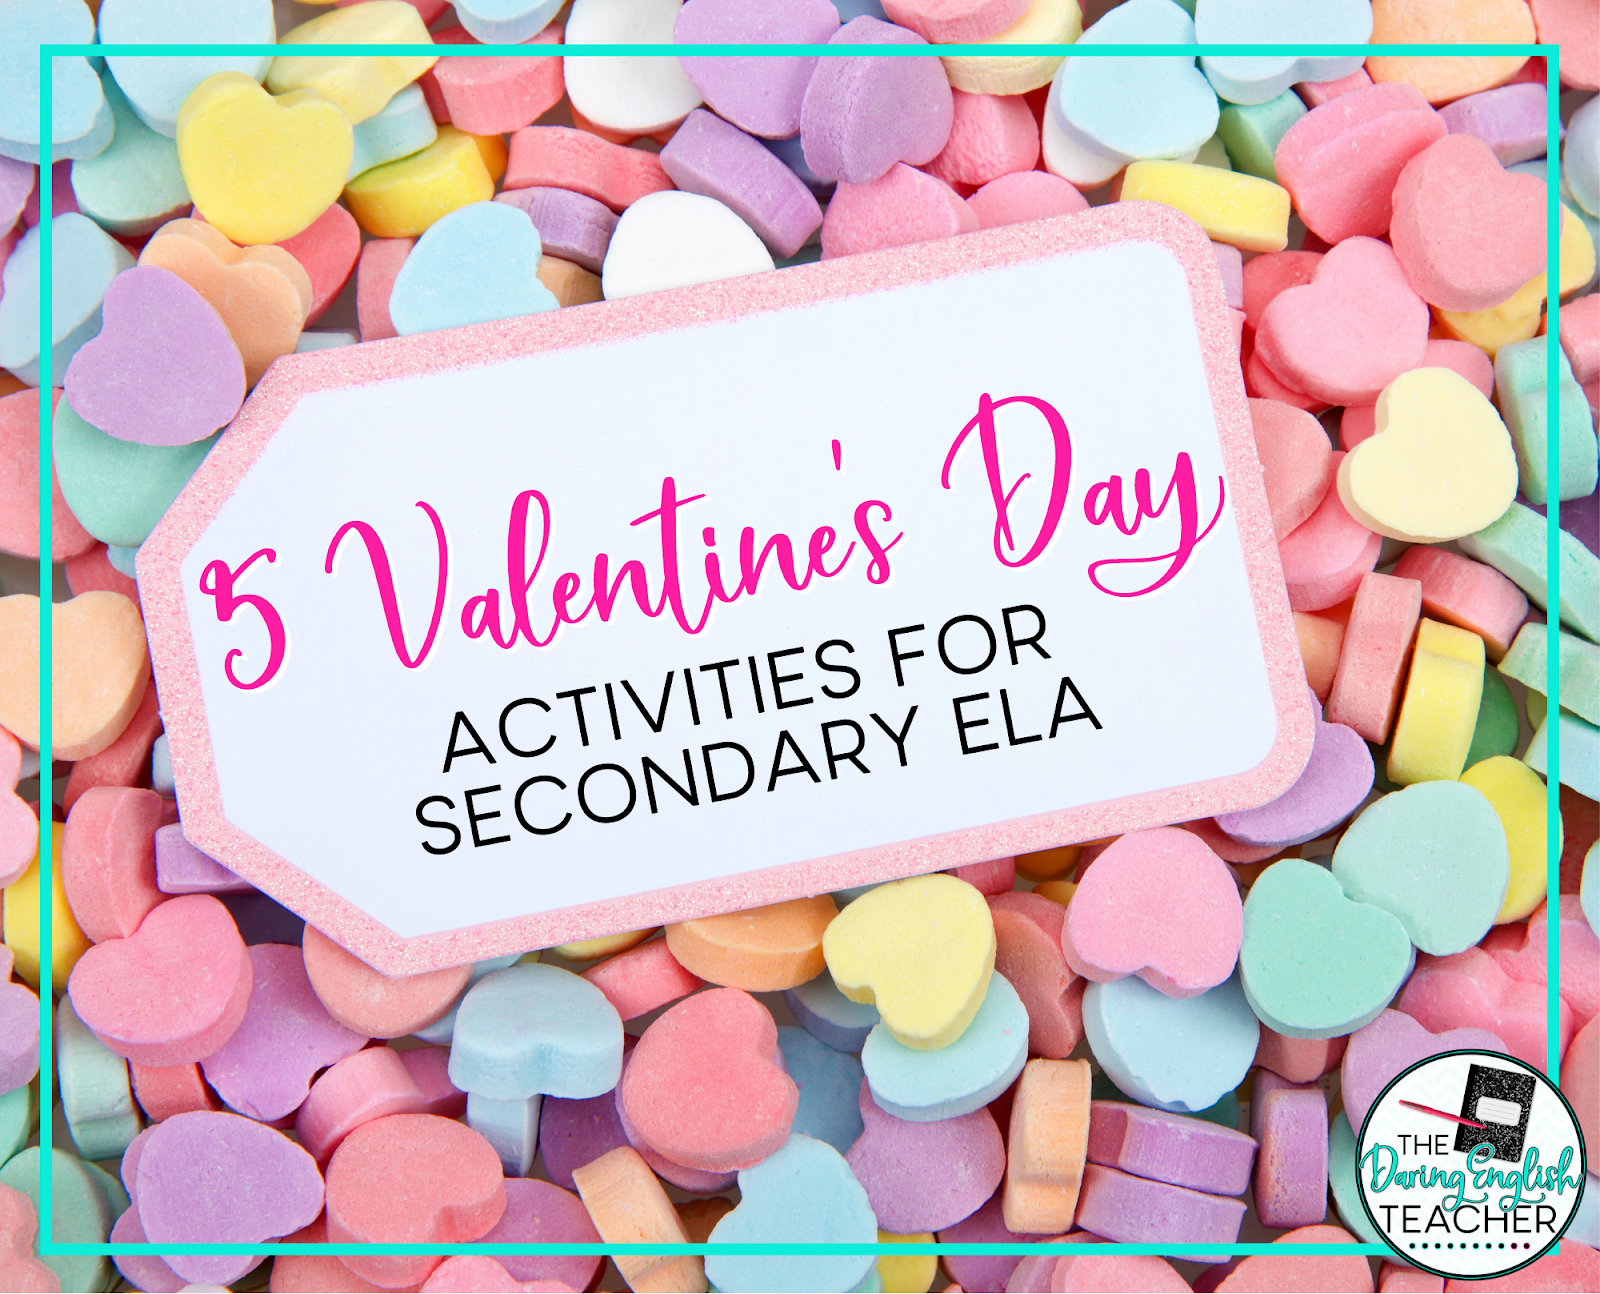 5 Valentine's Day Activities for Secondary ELA